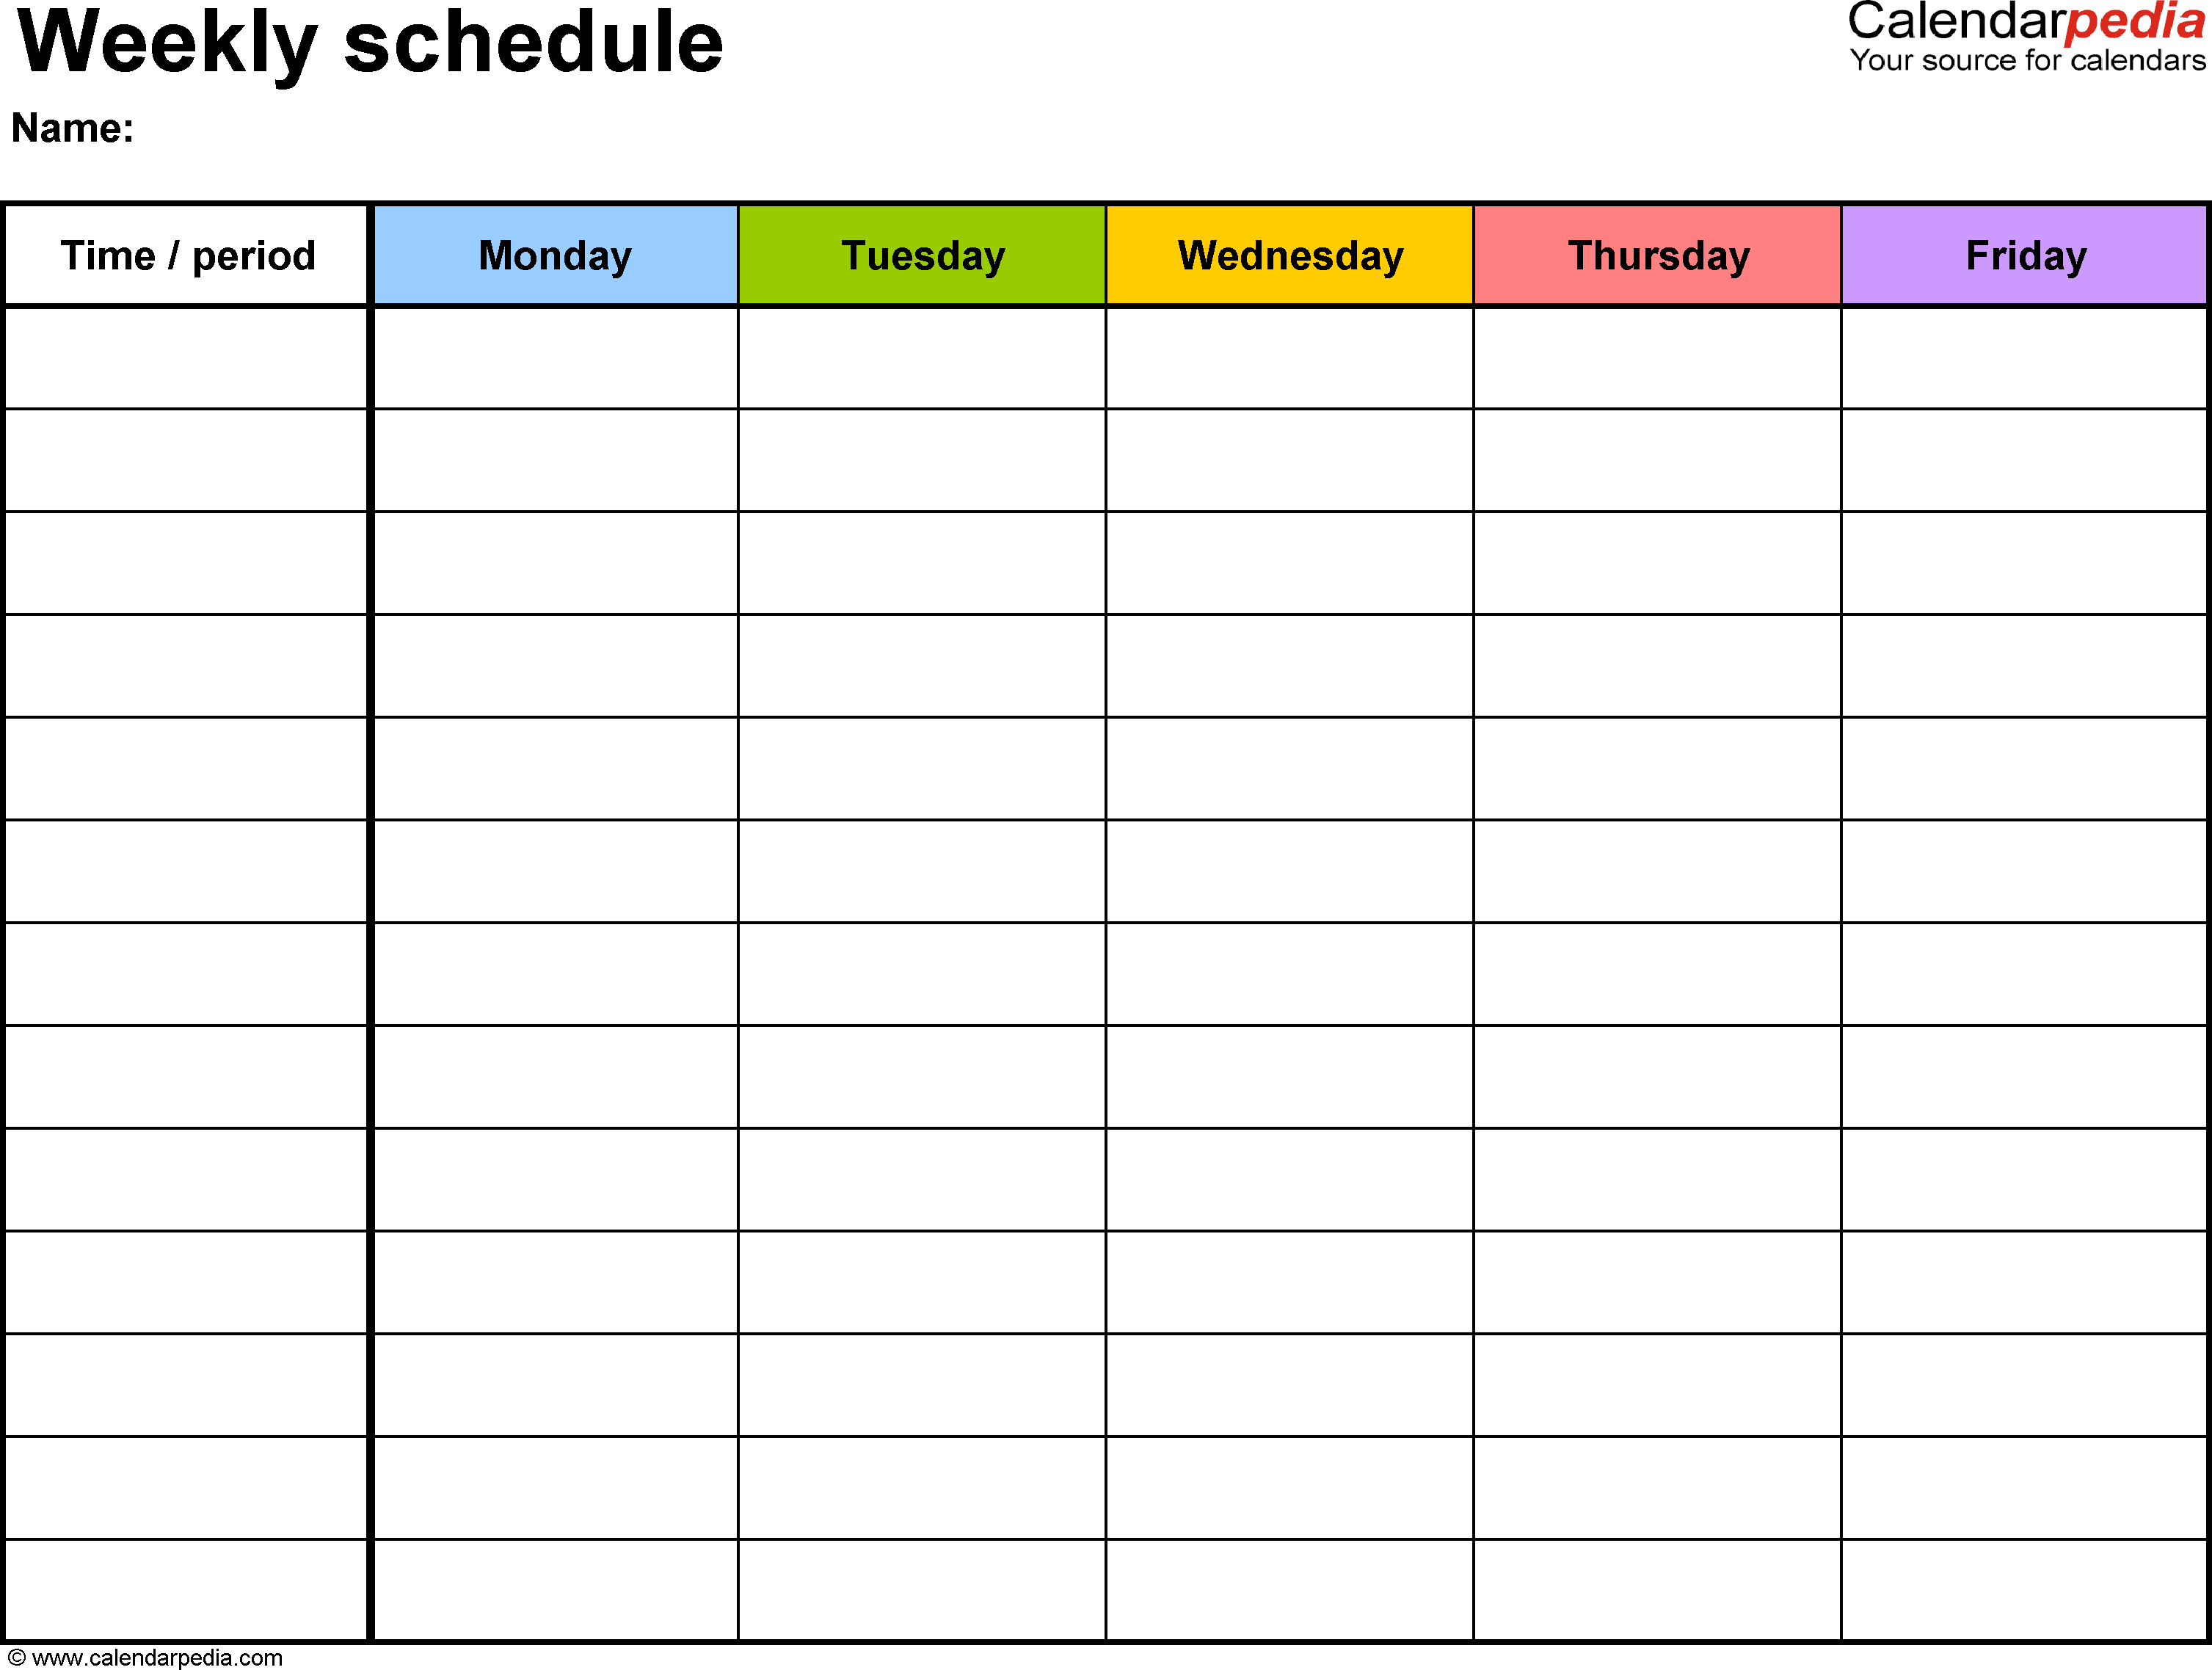 Free Weekly Schedule Templates For Excel - 18 Templates inside Monthly Project Timeline Template Excel